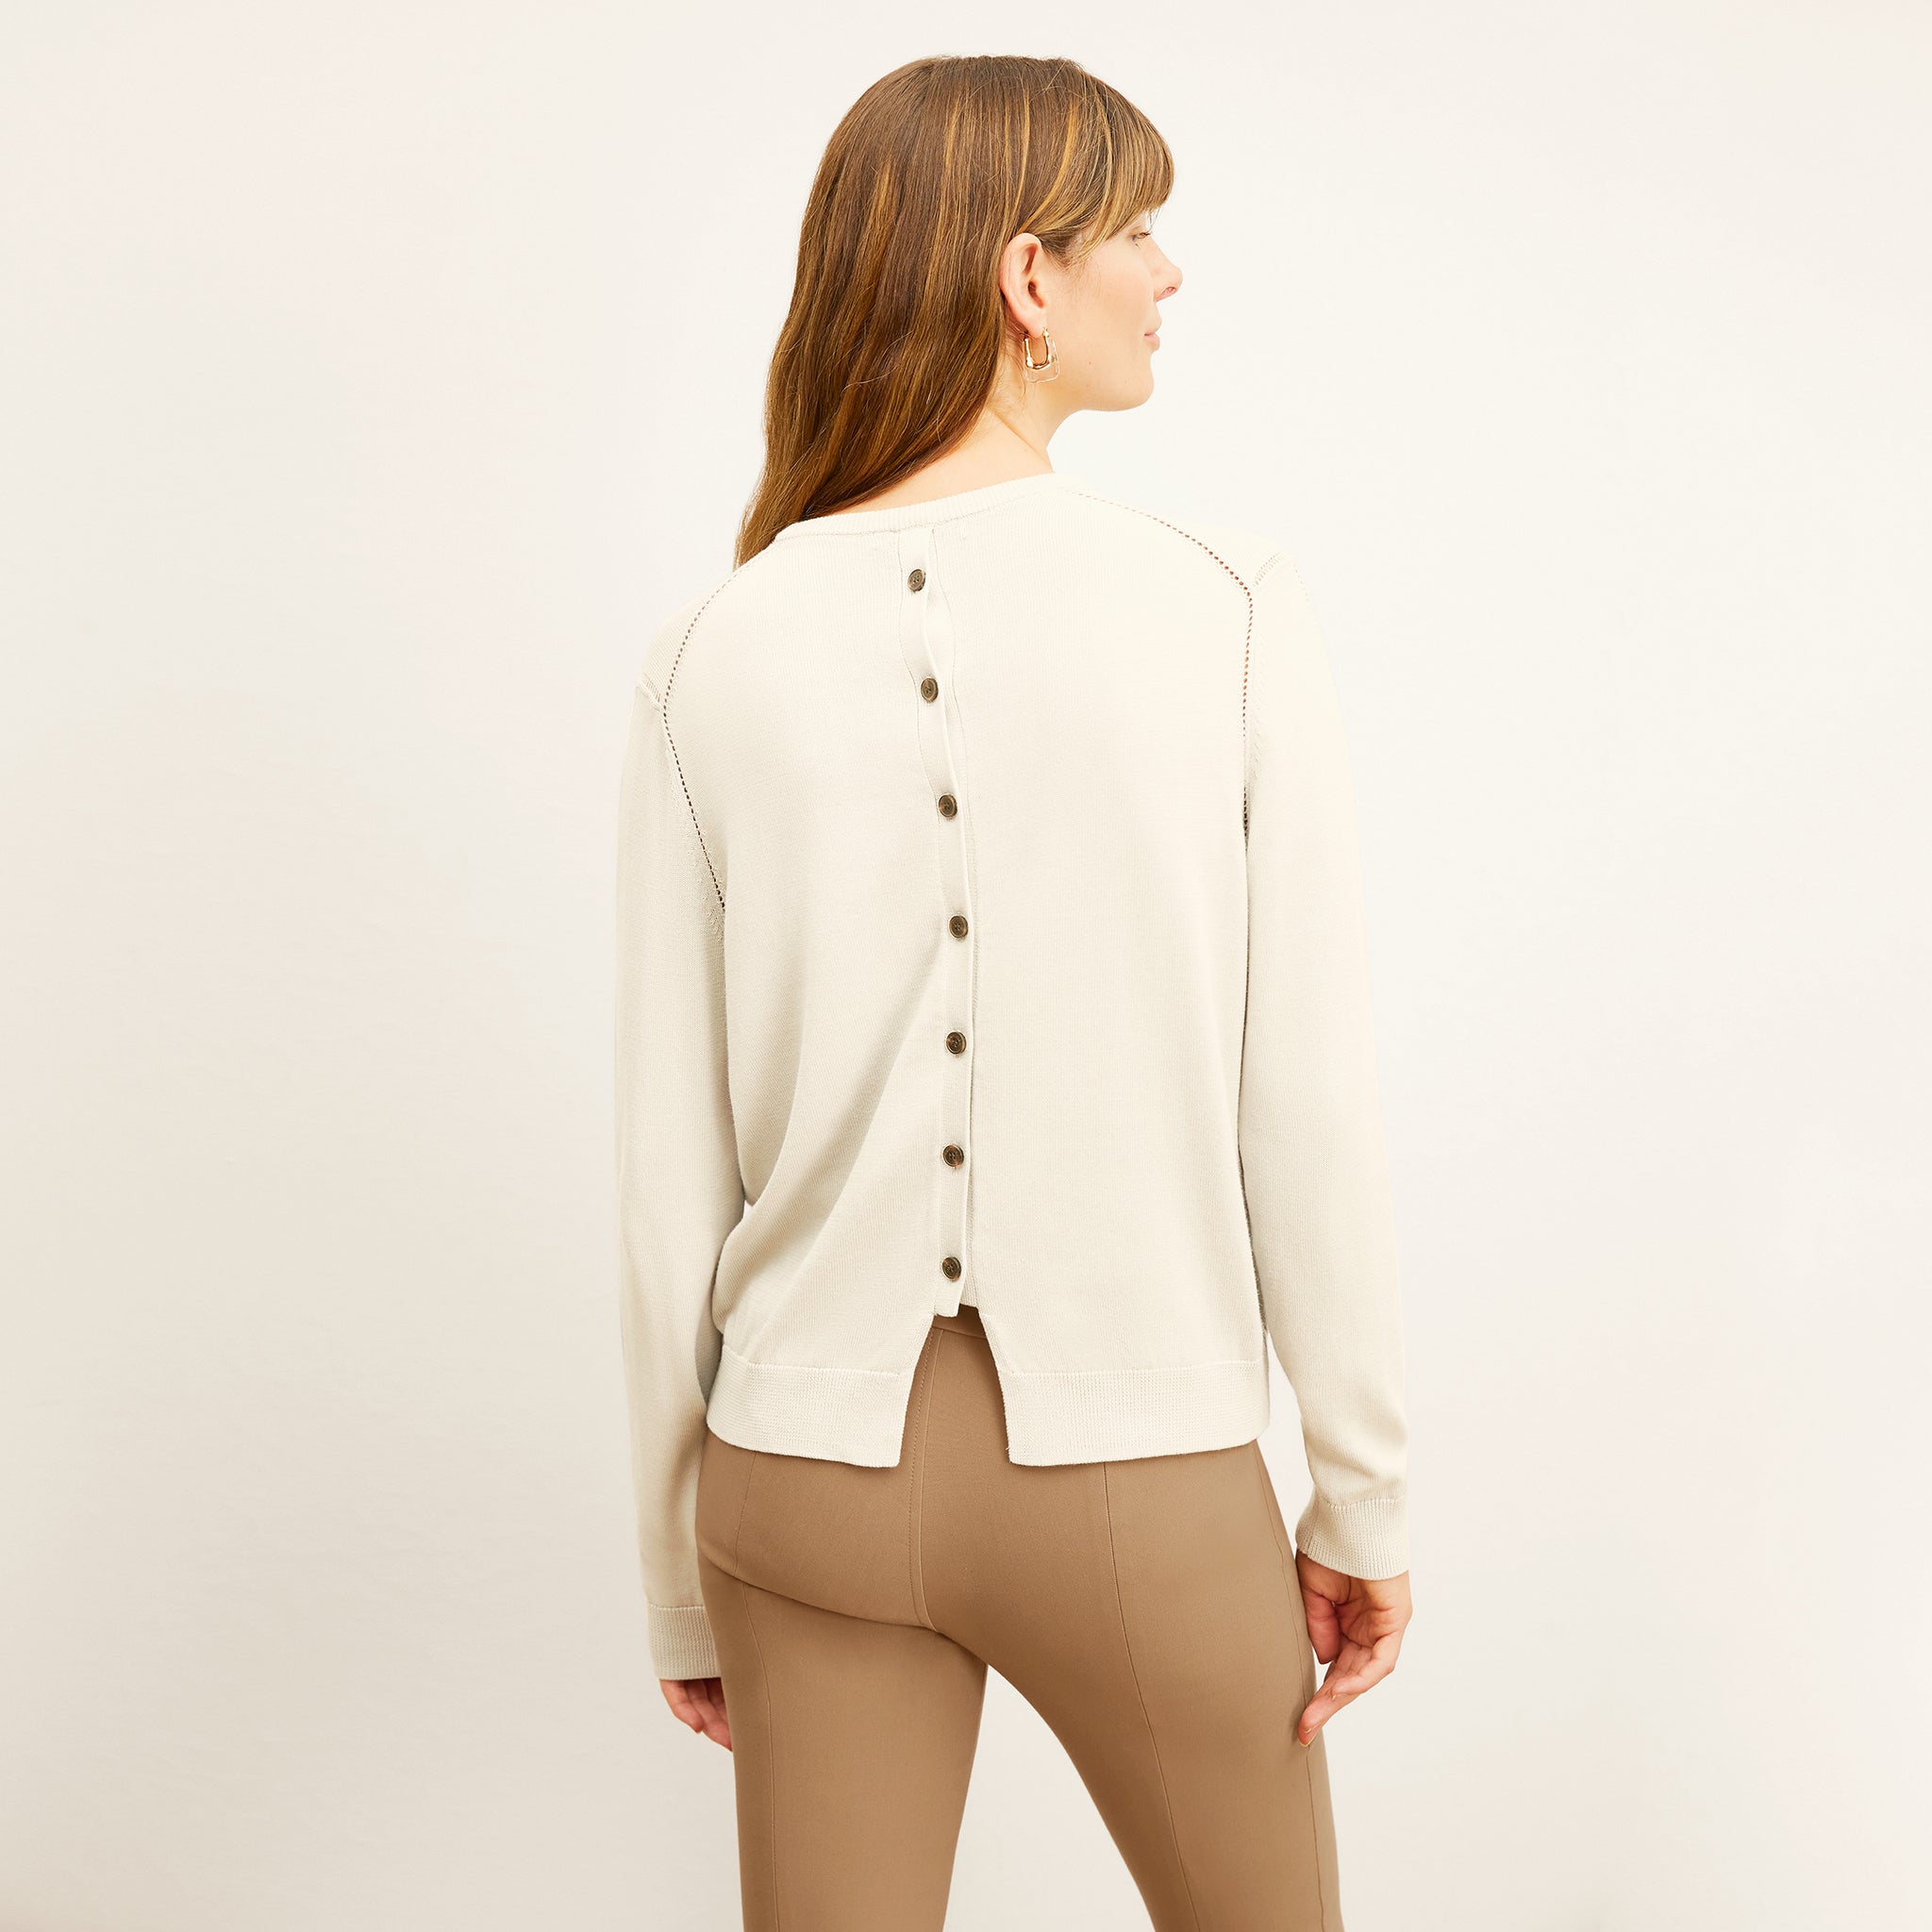 Back image of a woman wearing the Kick Flare Foster pant